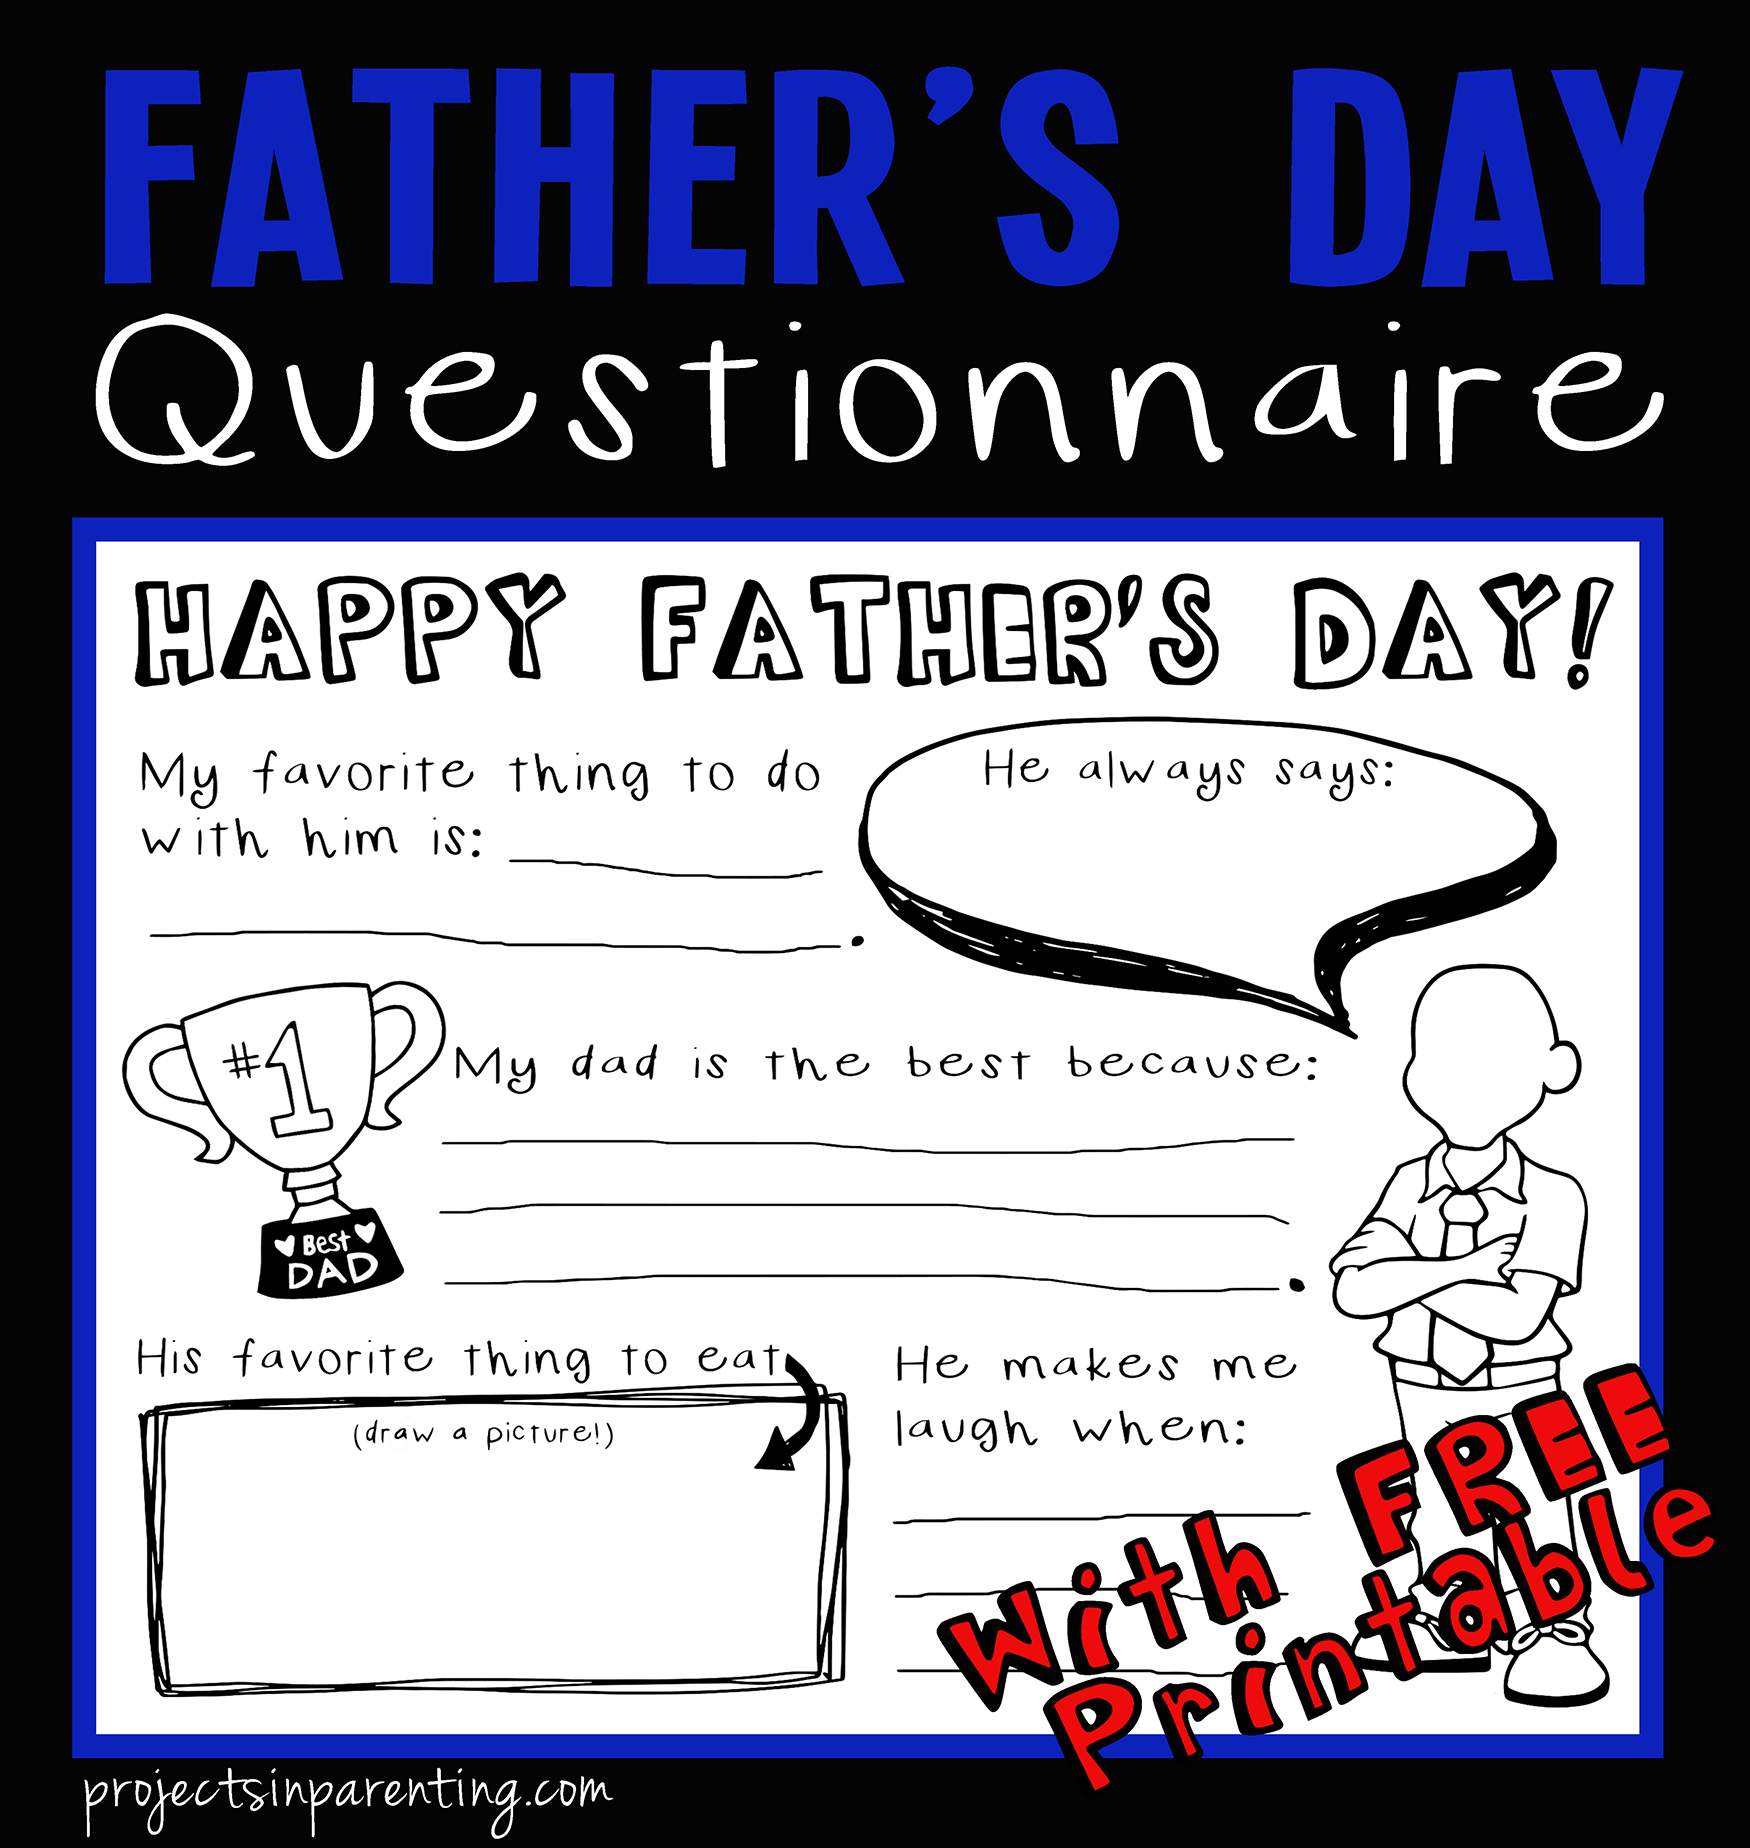 Happy Father's Day Free Printable Questionnaire, All About Me - projectsinparenting.com